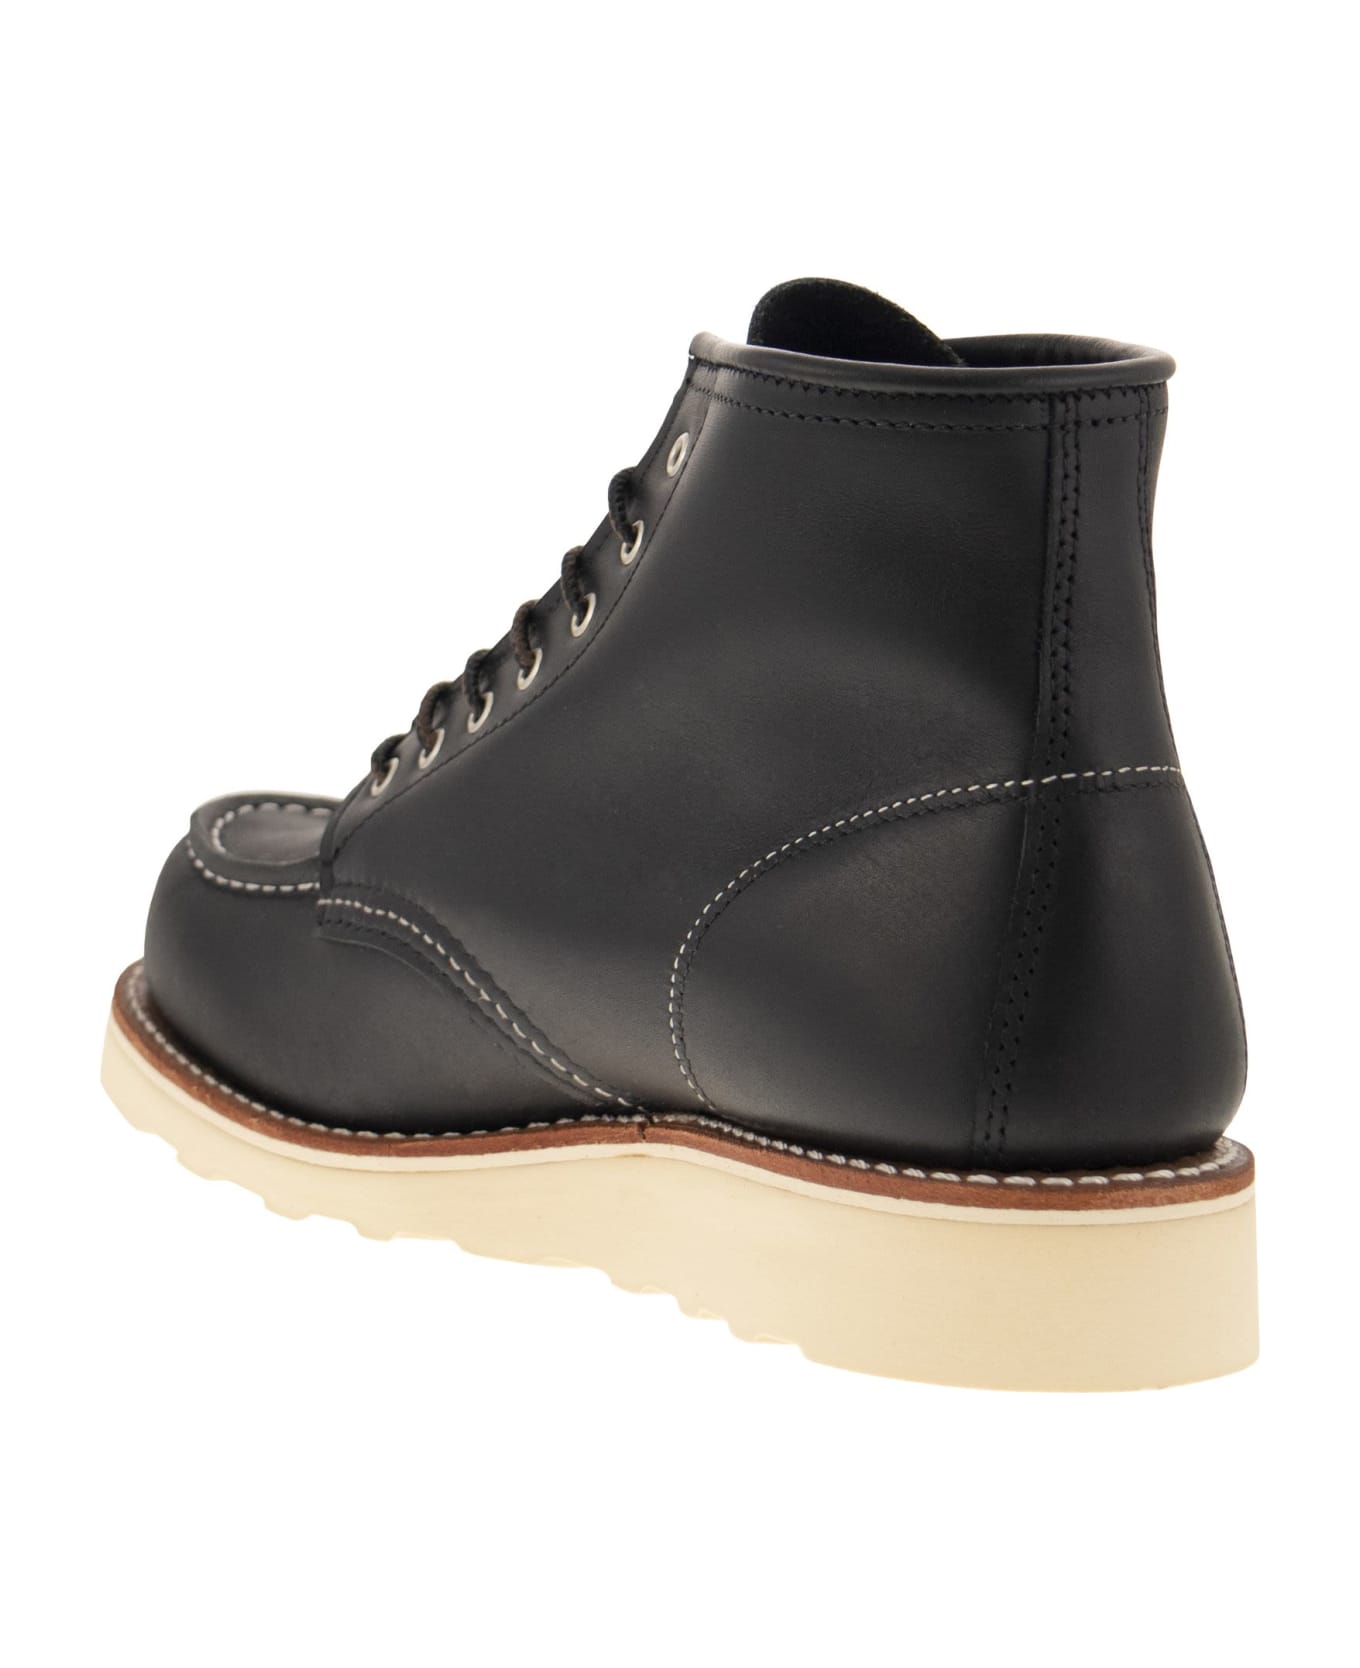 Red Wing Classic Moc - Leather Ankle Boot - Black ブーツ